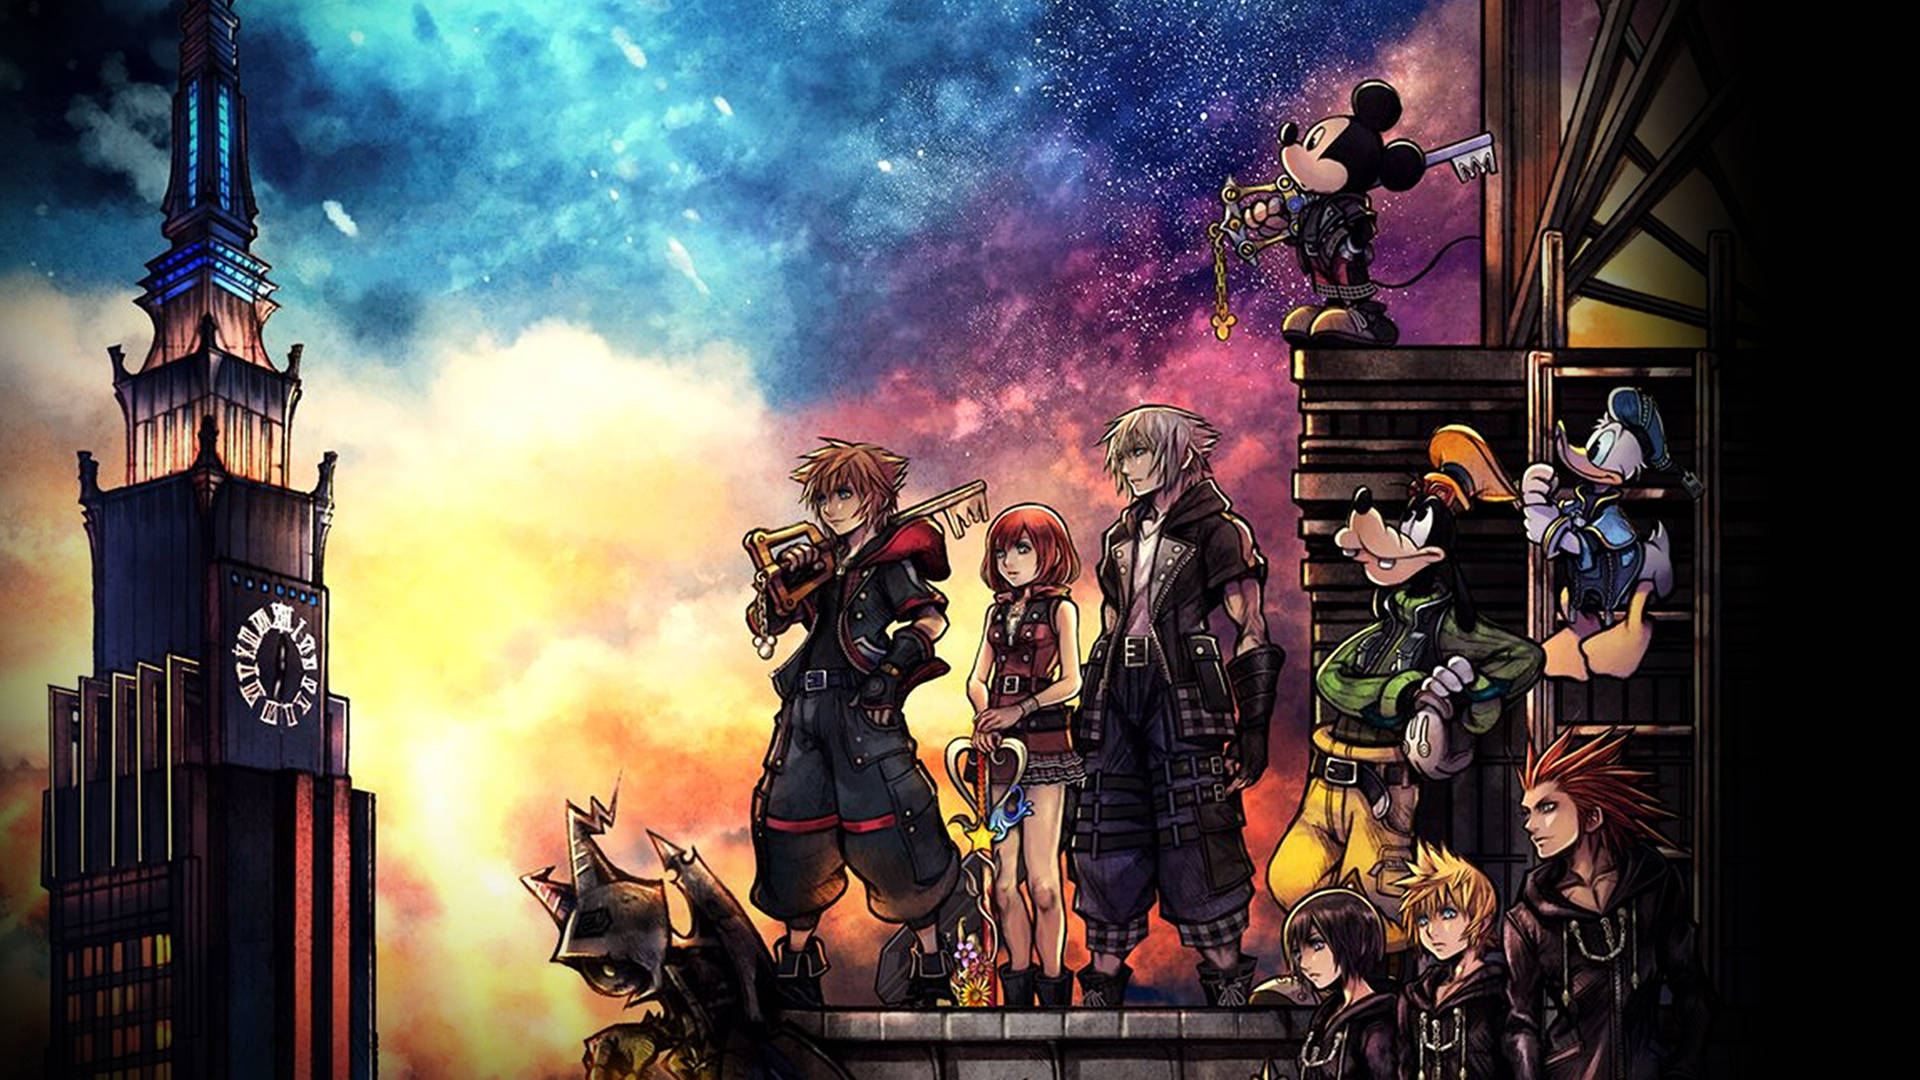 Kingdom Hearts 3 Pictures